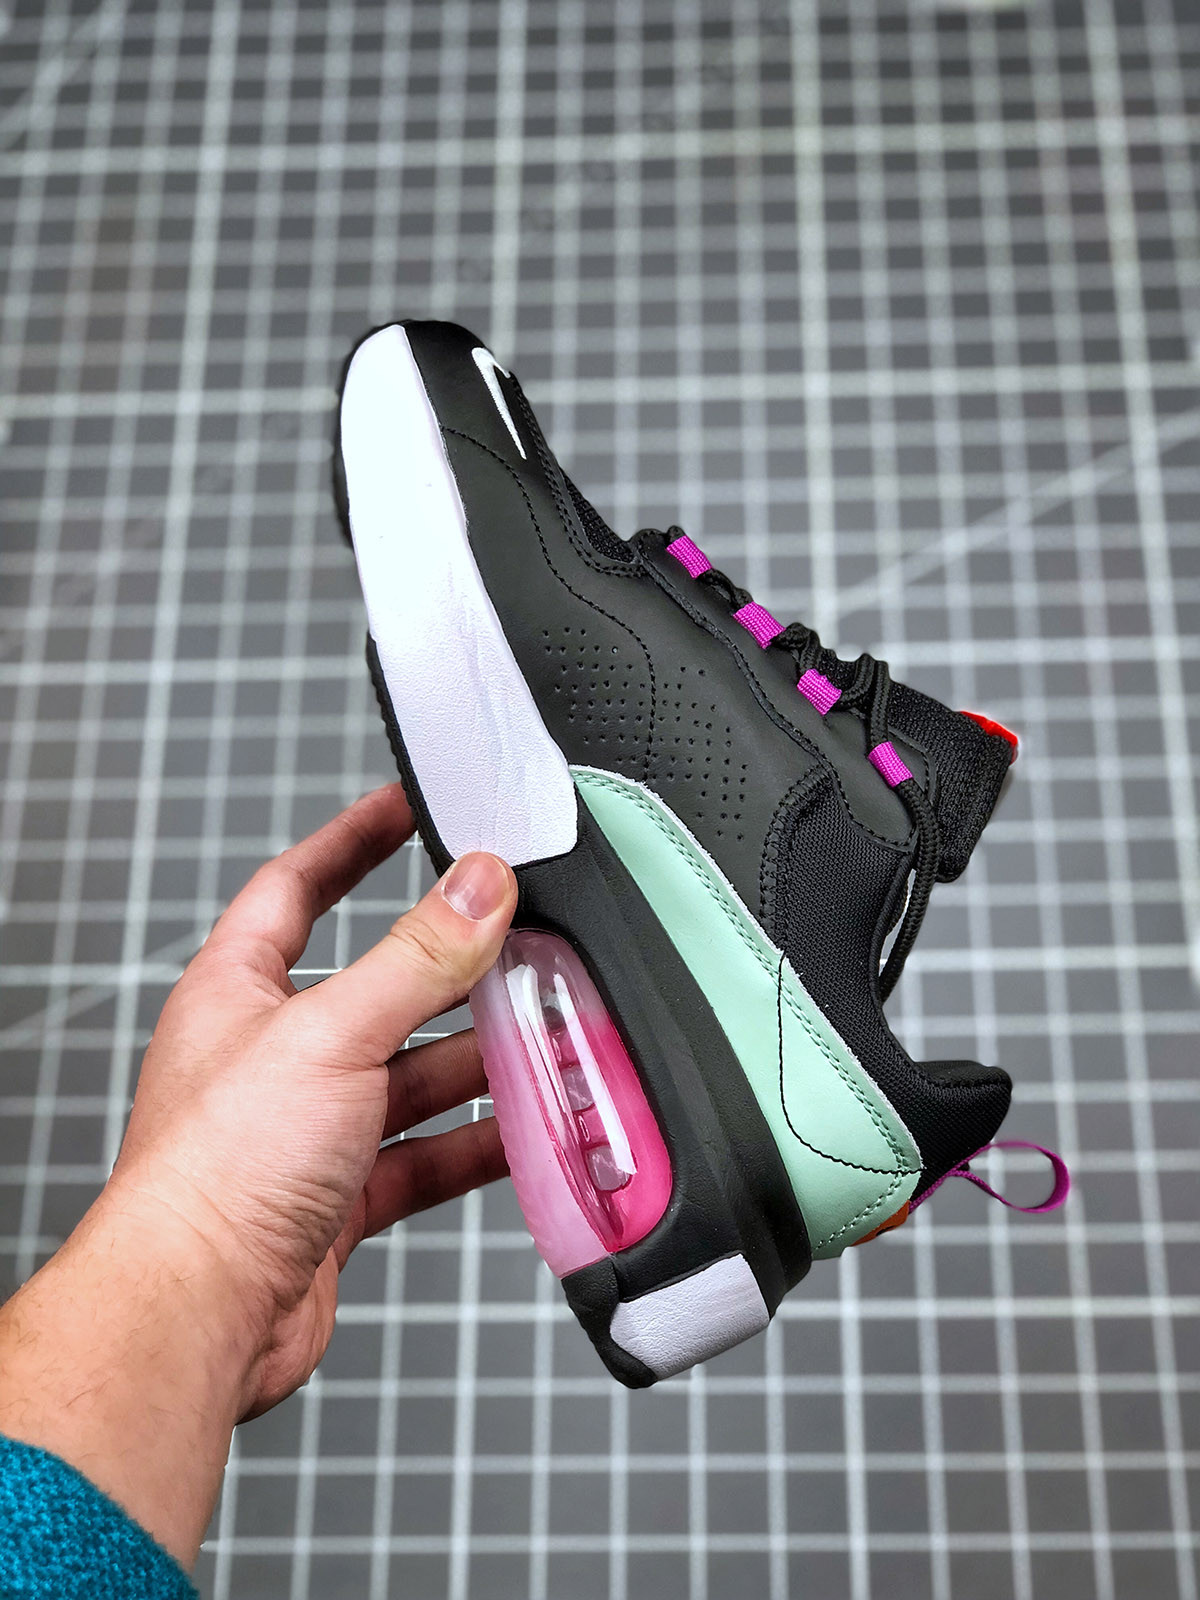 Nike WMNS Air Max Verona Black Summit White-Fire Pink For Sale